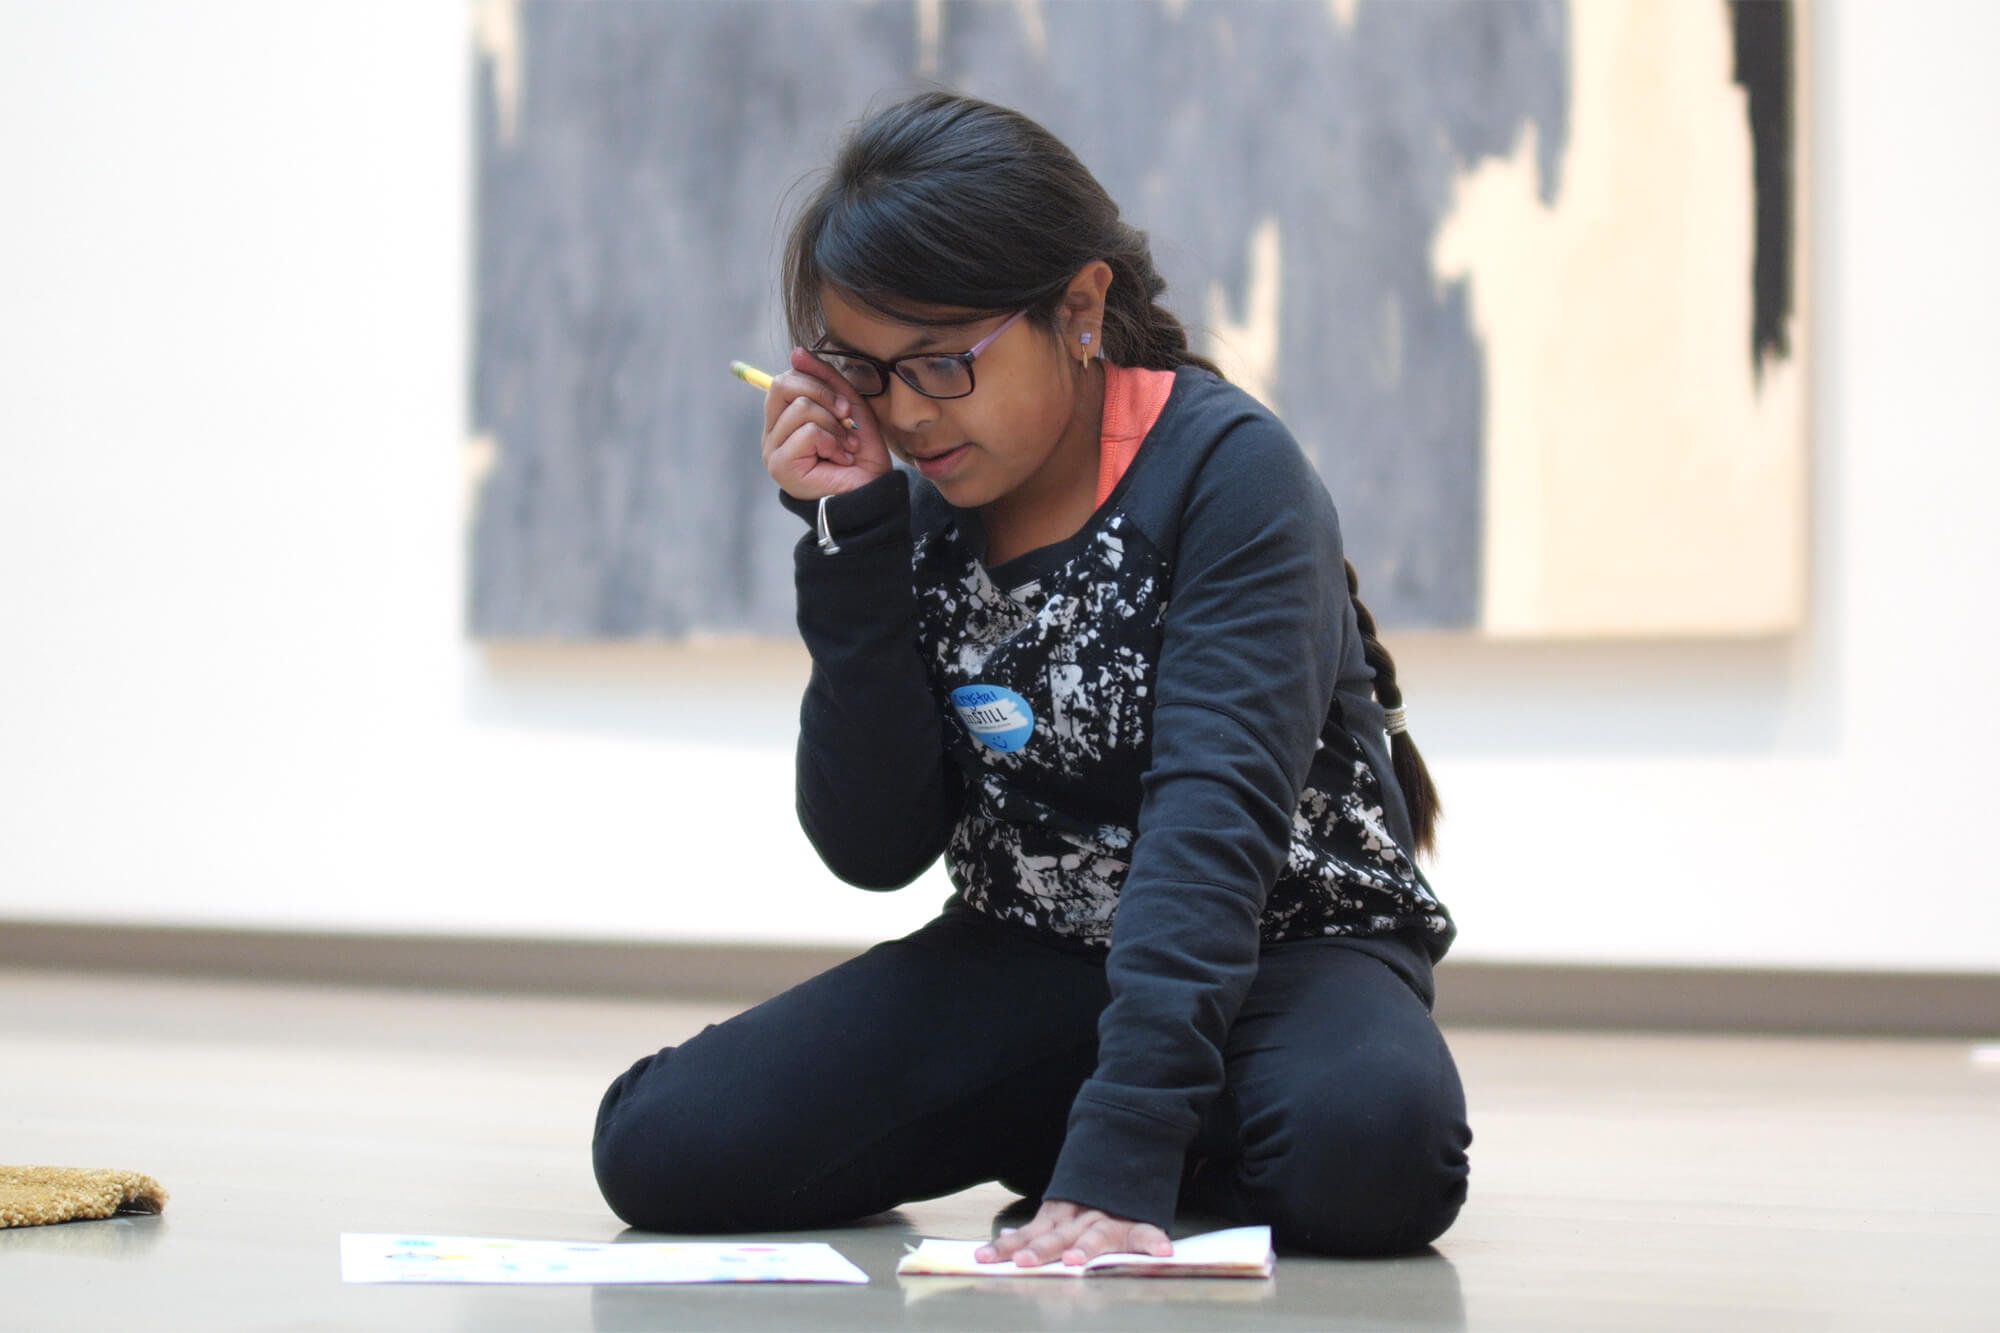 A student sits on the floor of a gallery and writes on paper